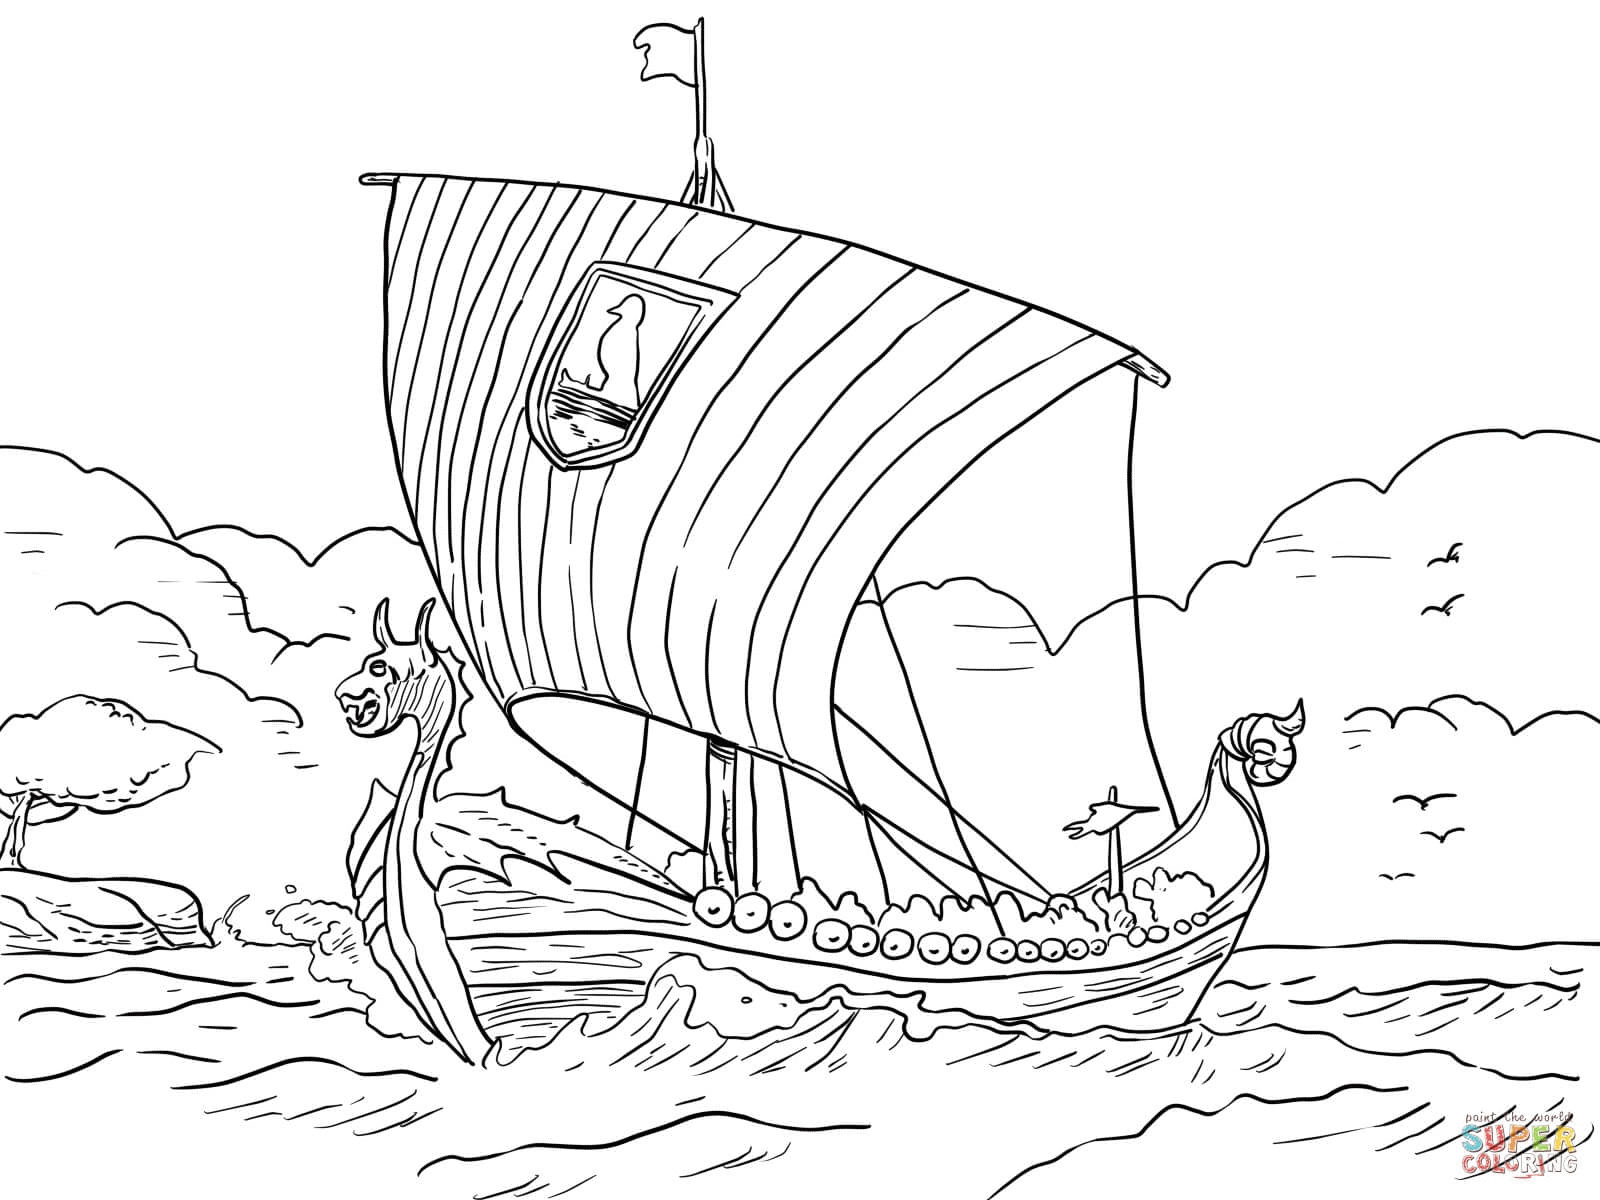 17 Free Pictures for: Mayflower Coloring Page. Temoon.us